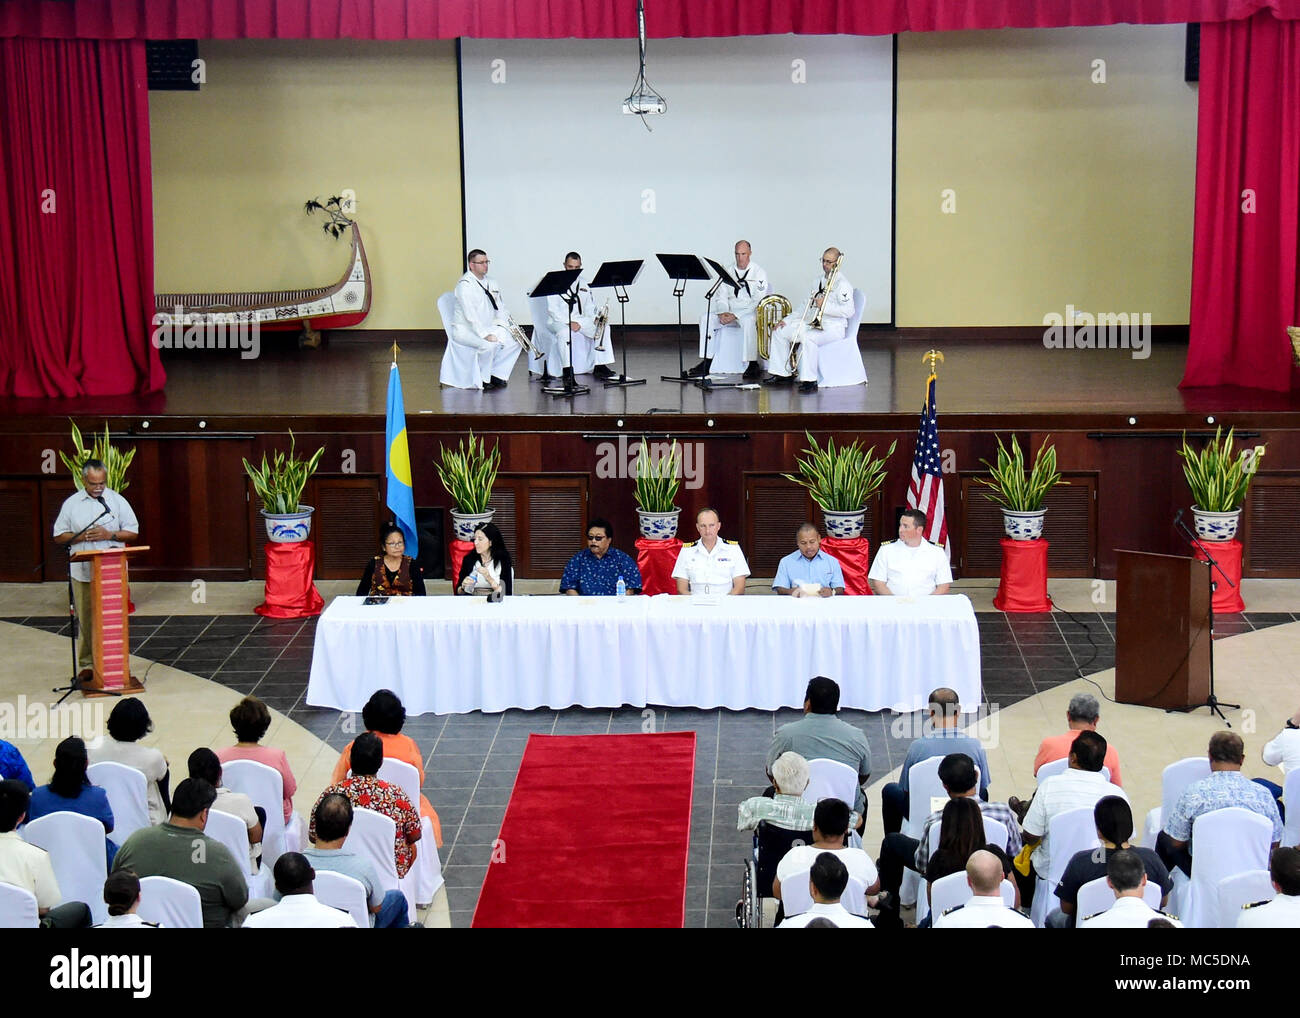 180404-N-QV906-033 KOROR, Republic of Palau (April 4, 2018) Distinguished attendees sit at the head table during the opening ceremony of Pacific Partnership 2018 (PP18) mission stop Palau April 4. The distinguished attendees included the Honorable Raynold B. Oilouch, Vice President of Palau, the Honorable Faustina Rehuher Marugg, Minister of State of Palau, Paramount Chief Ibedul Yataka M. Gibbons, the Honorable Amy Hyatt, U.S. Ambassador to Palau, Capt. Peter Olive, deputy mission commmander of Pacific Partnership 2018, and Capt. Charles Black, commanding officer of USNS Brunswick. PP18's mis Stock Photo